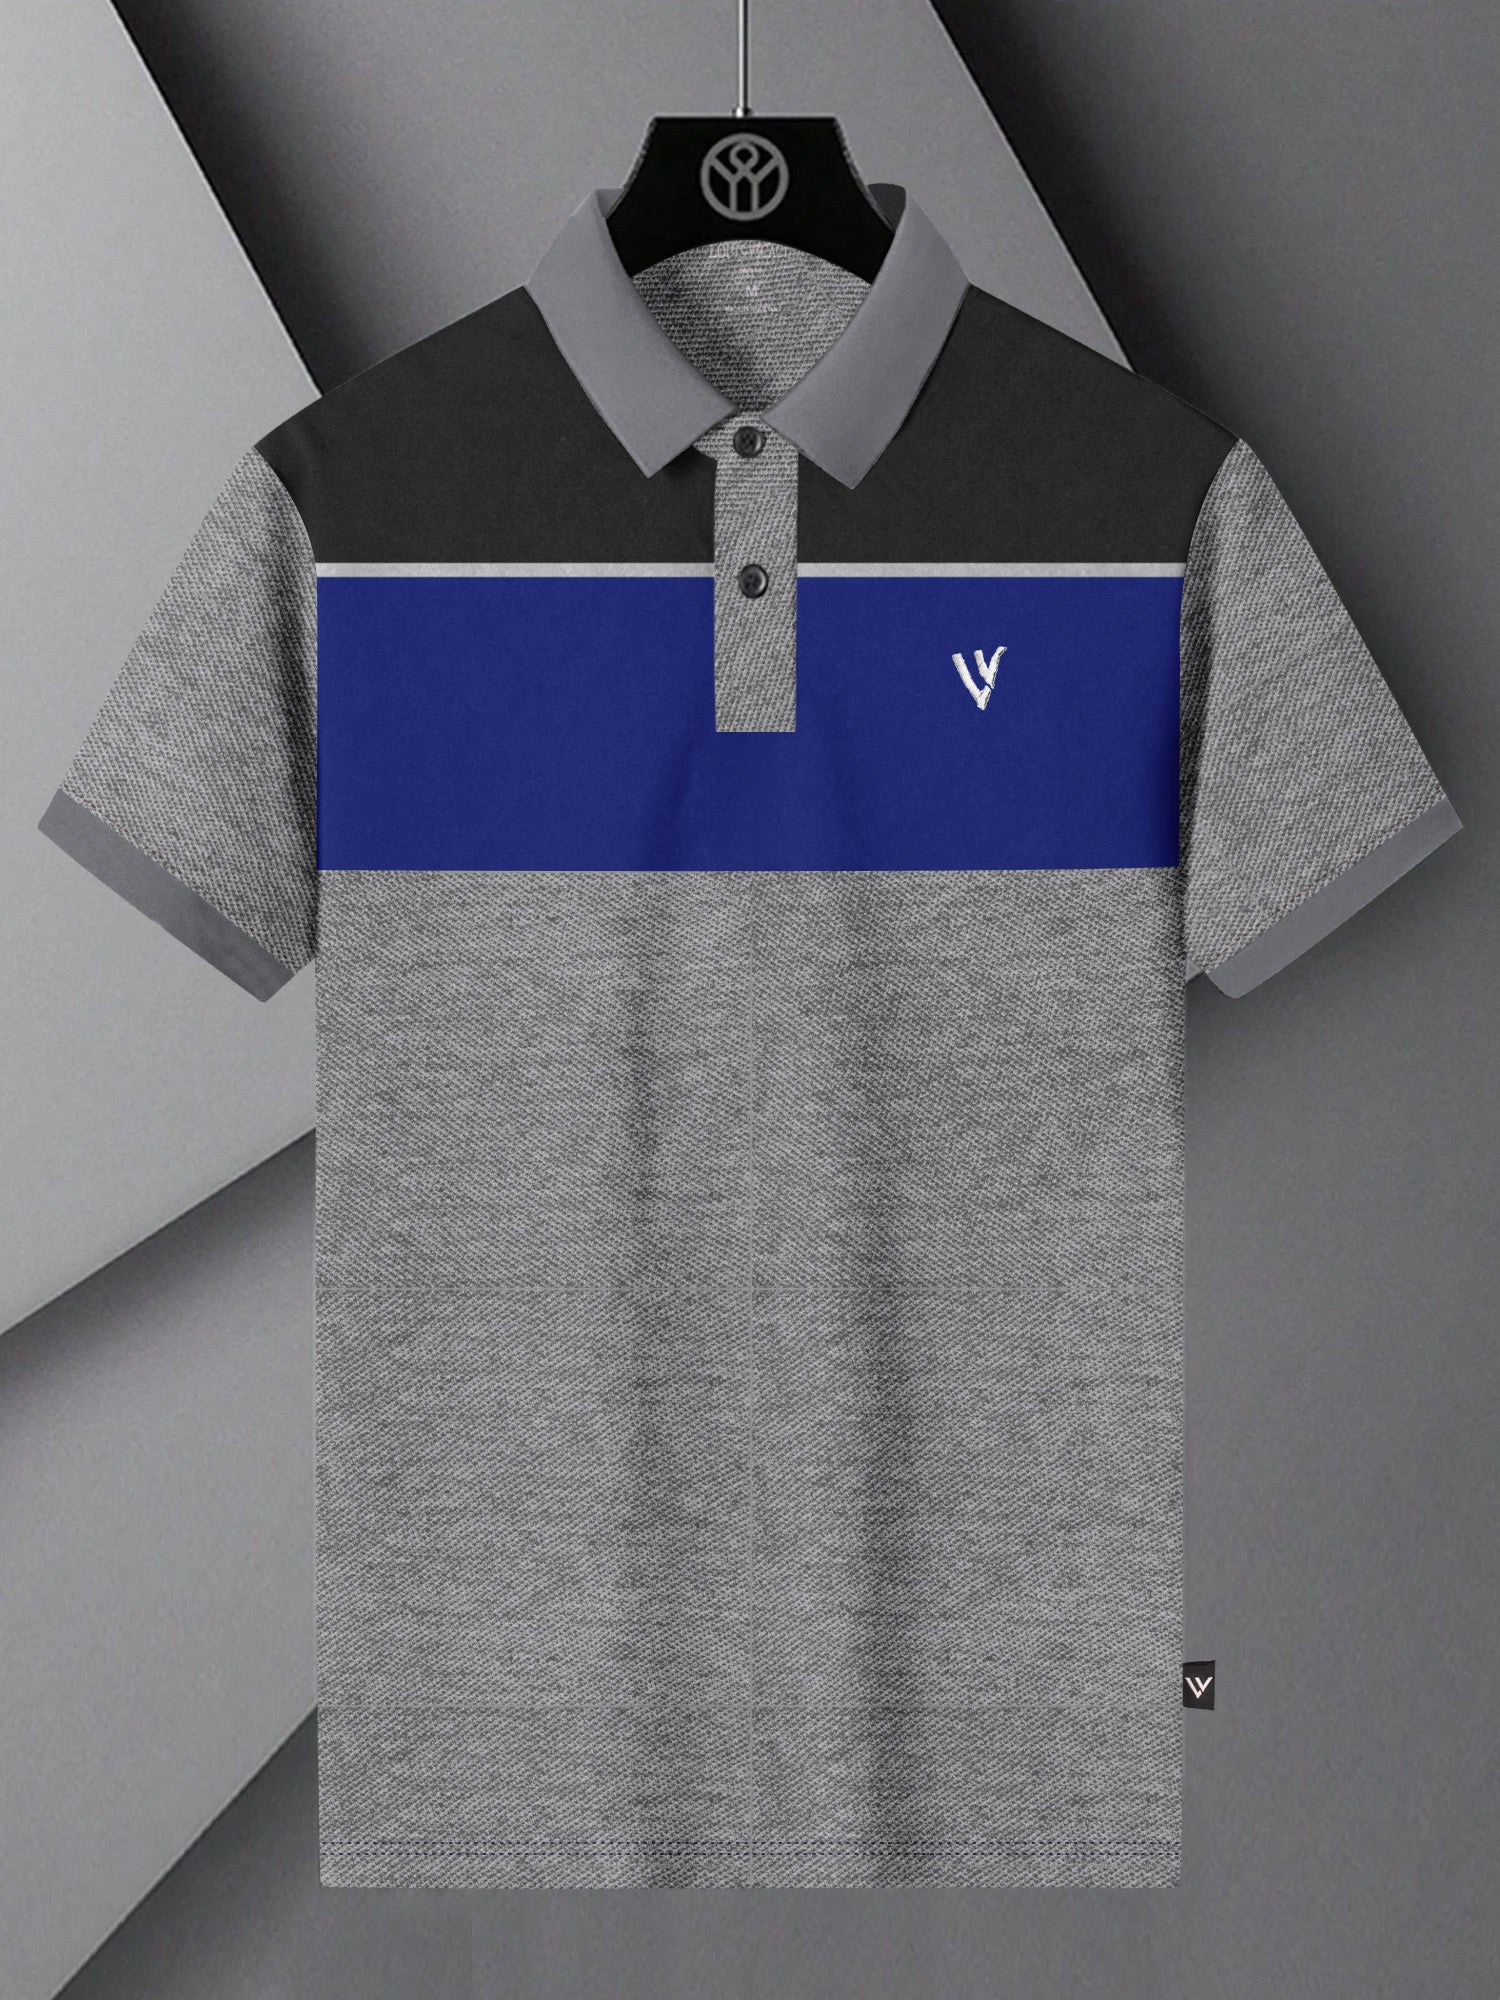 LV Summer Polo Shirt For Men-Grey Melange with Charcoal & Blue Panel-BE820/BR13060